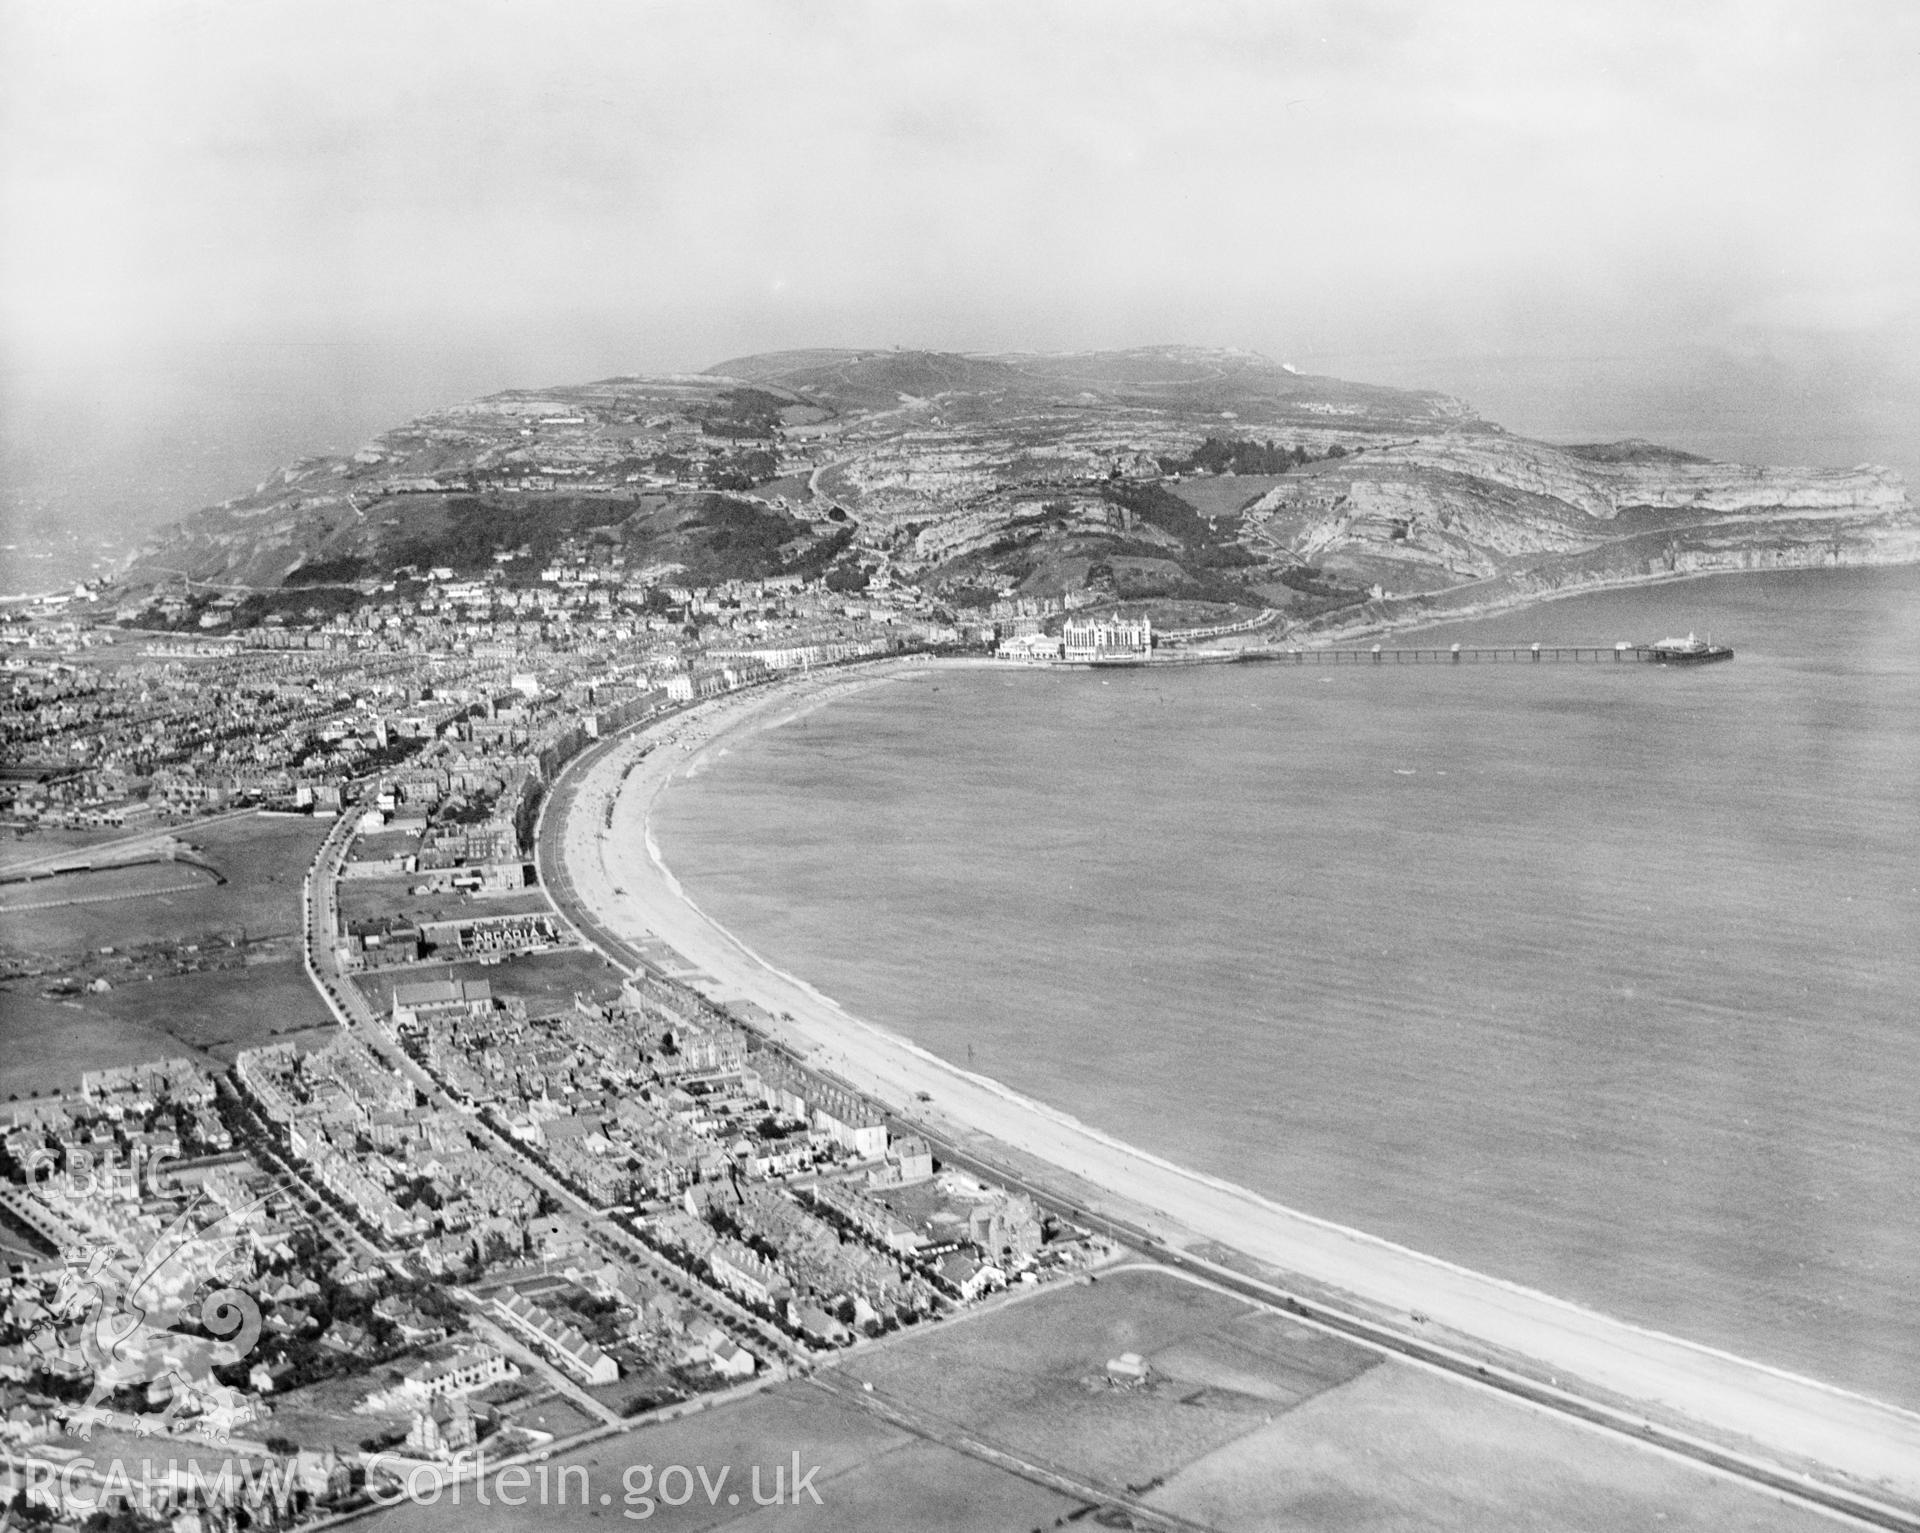 Distant view of Llandudno, oblique aerial view. 5?x4? black and white glass plate negative.